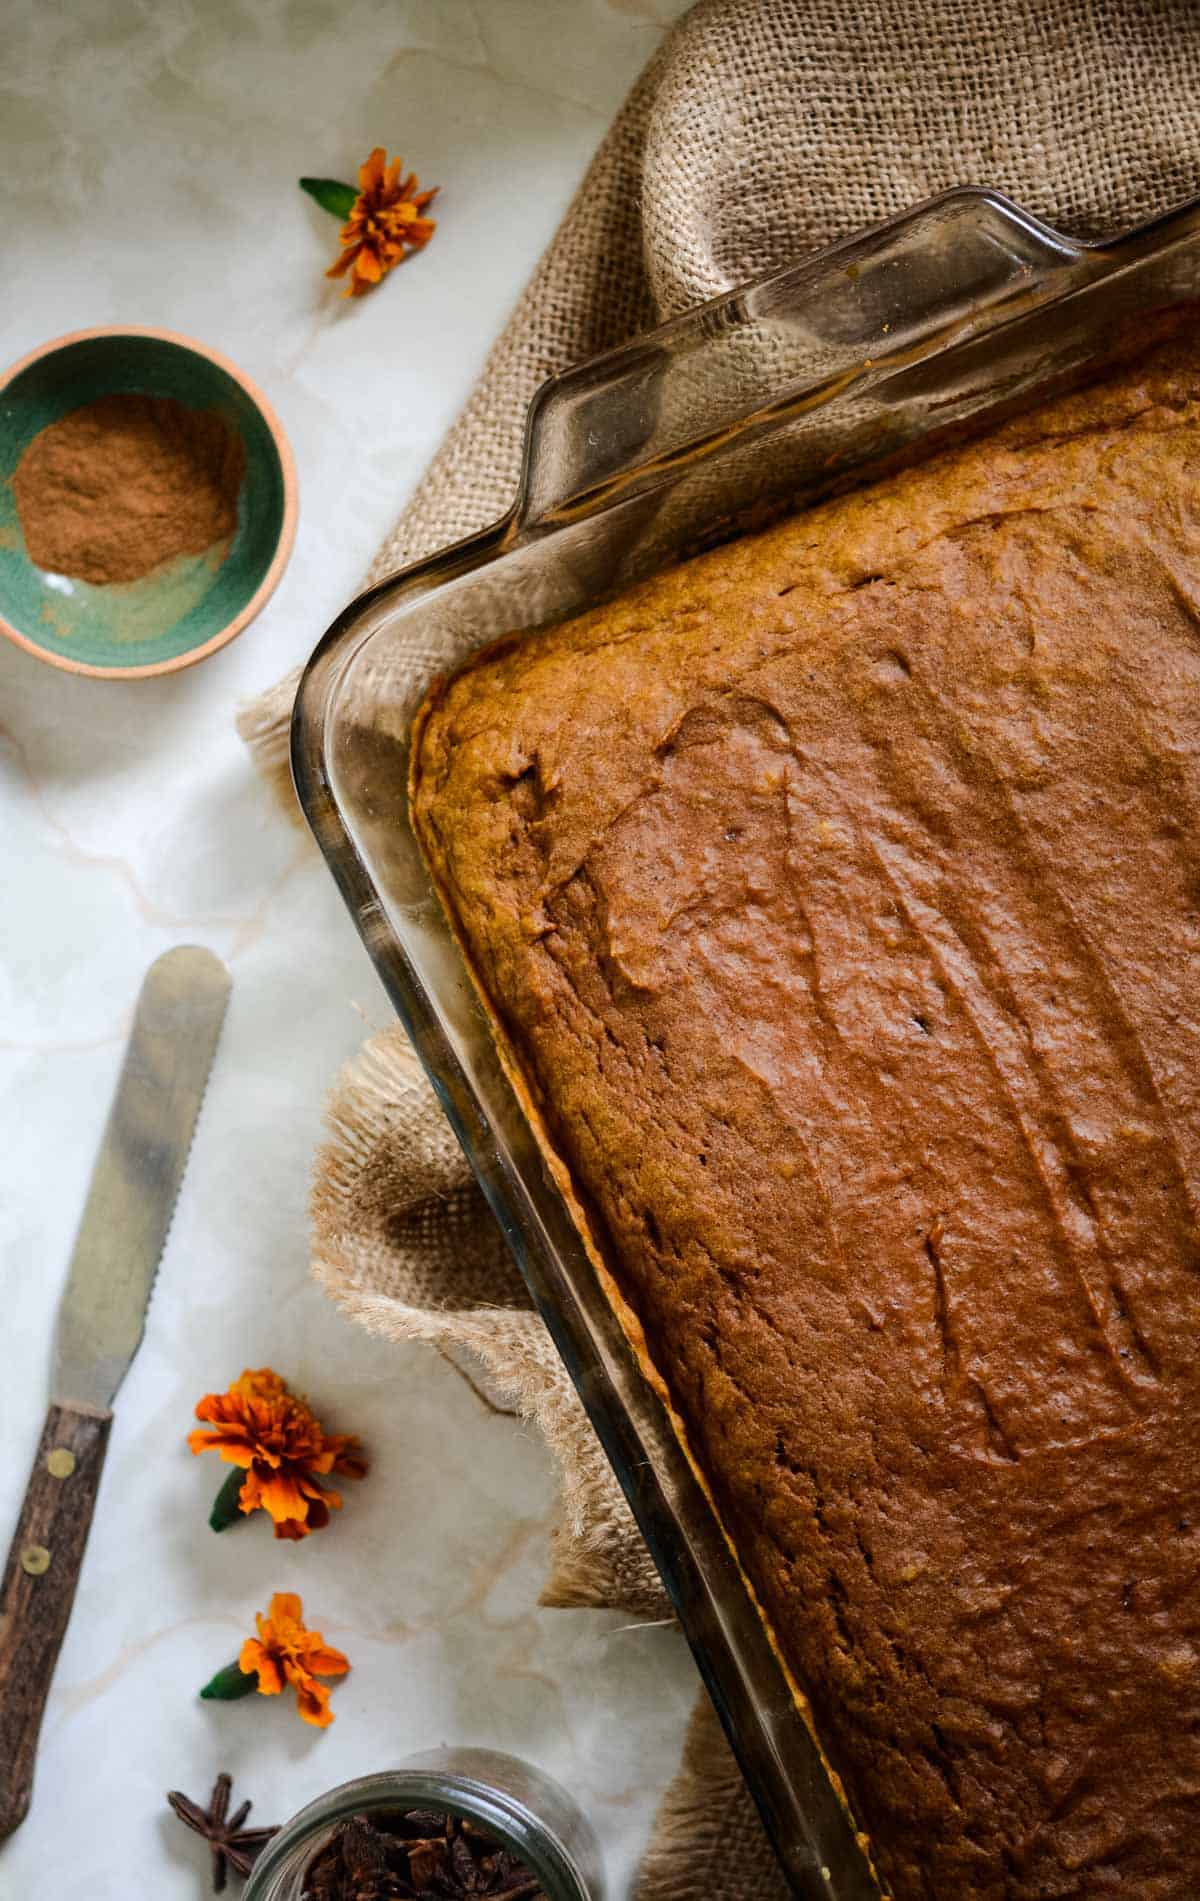 Dark orange colored sheet pan cake, with cinnamon and a knife beside.